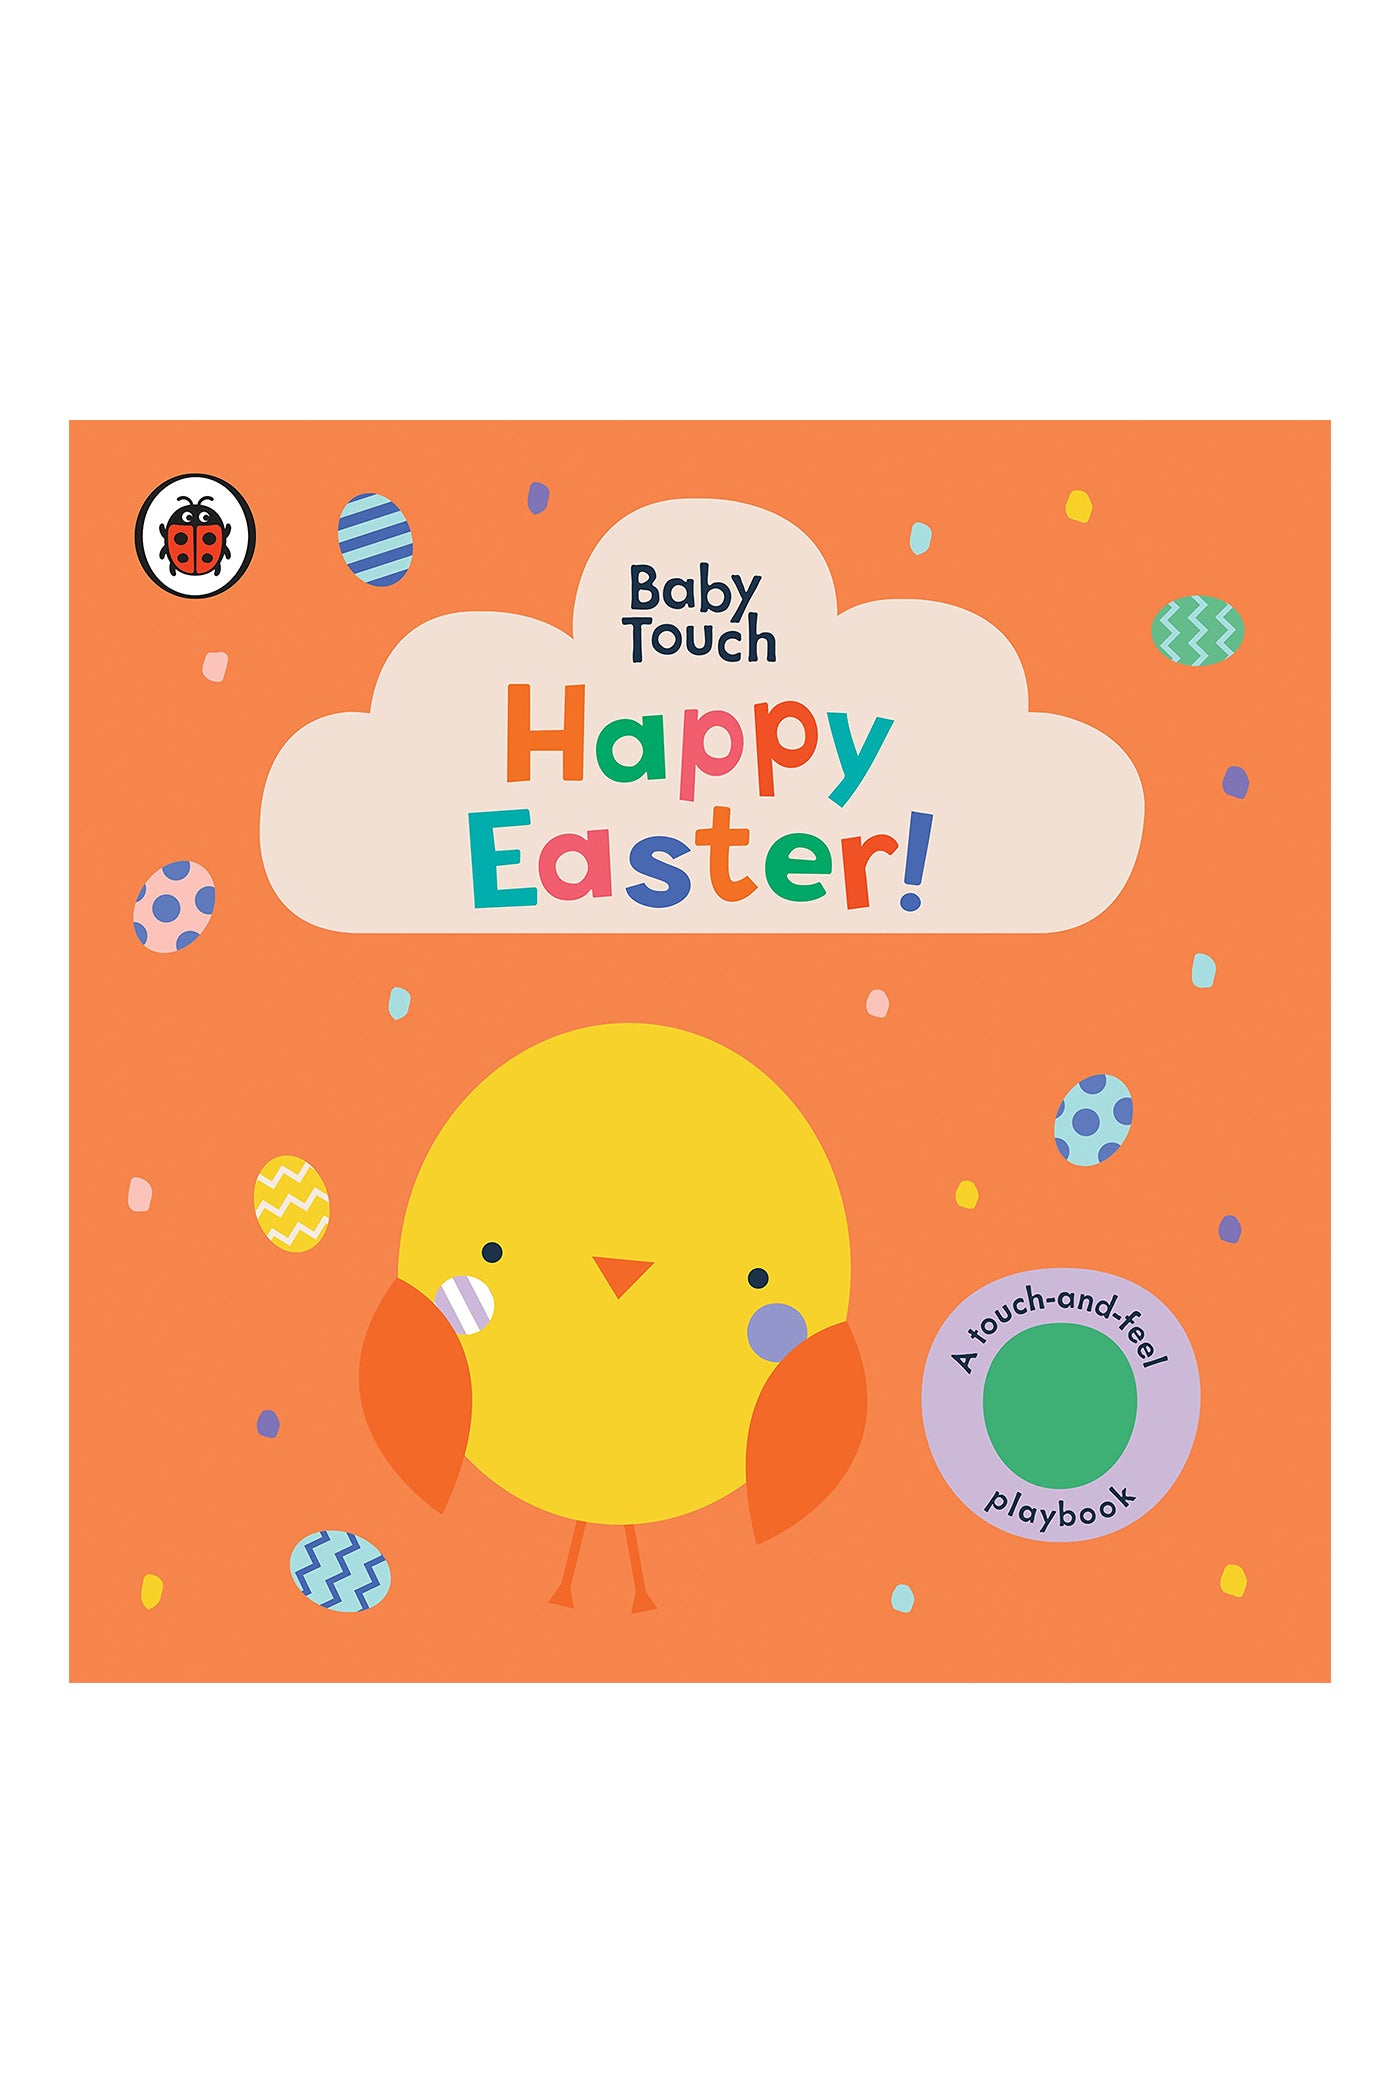 Happy Easter!: A Touch-and-Feel Playbook (Baby Touch) Board Book